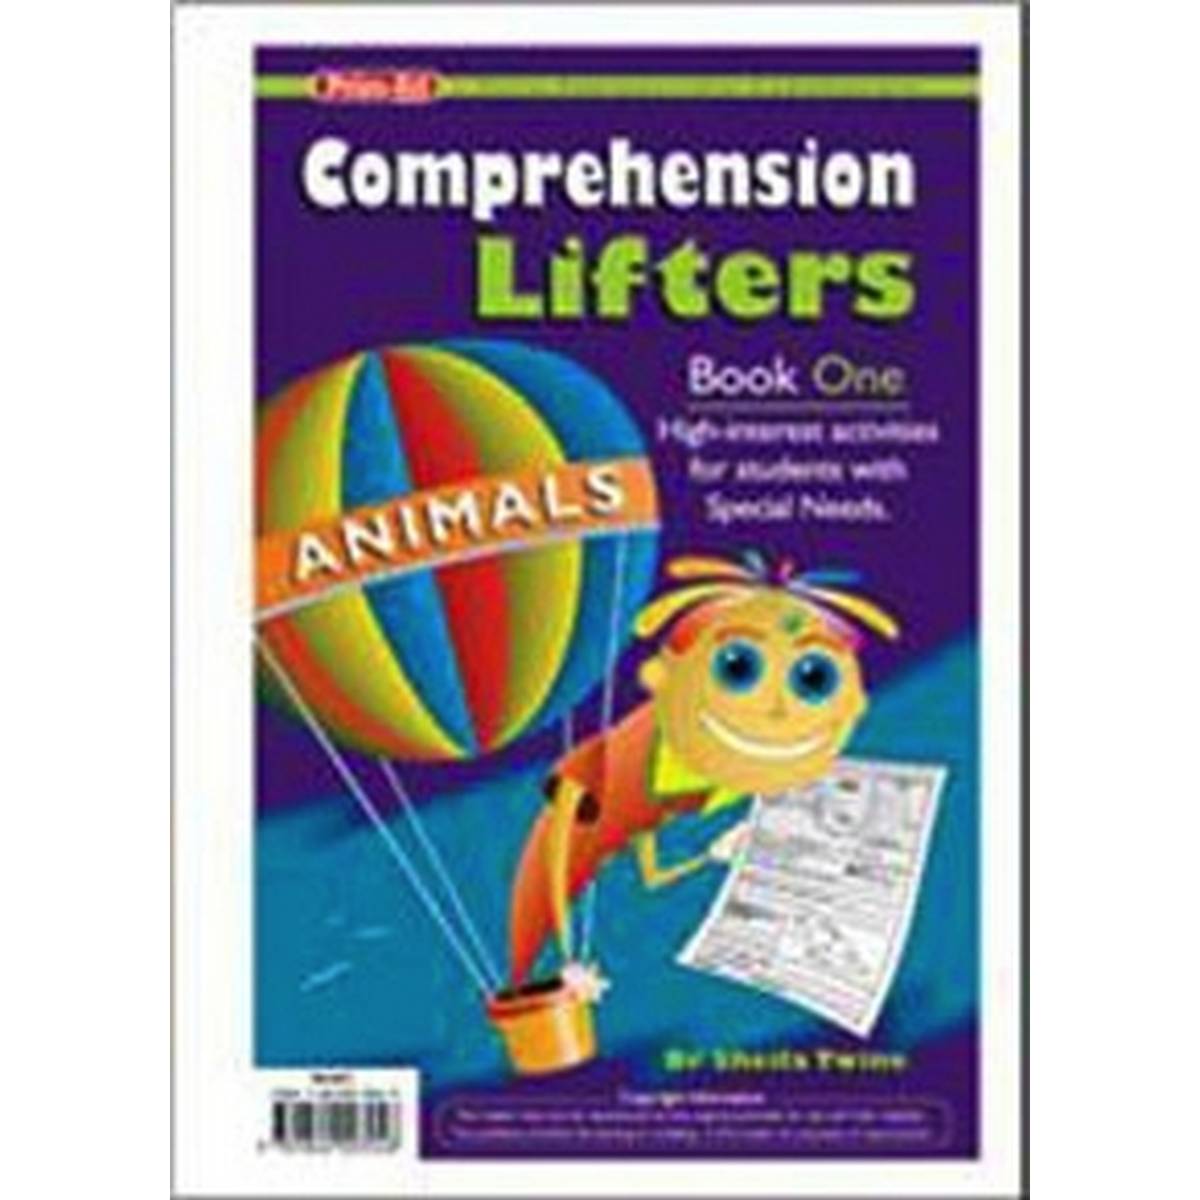 Comprehension Lifters Book 1